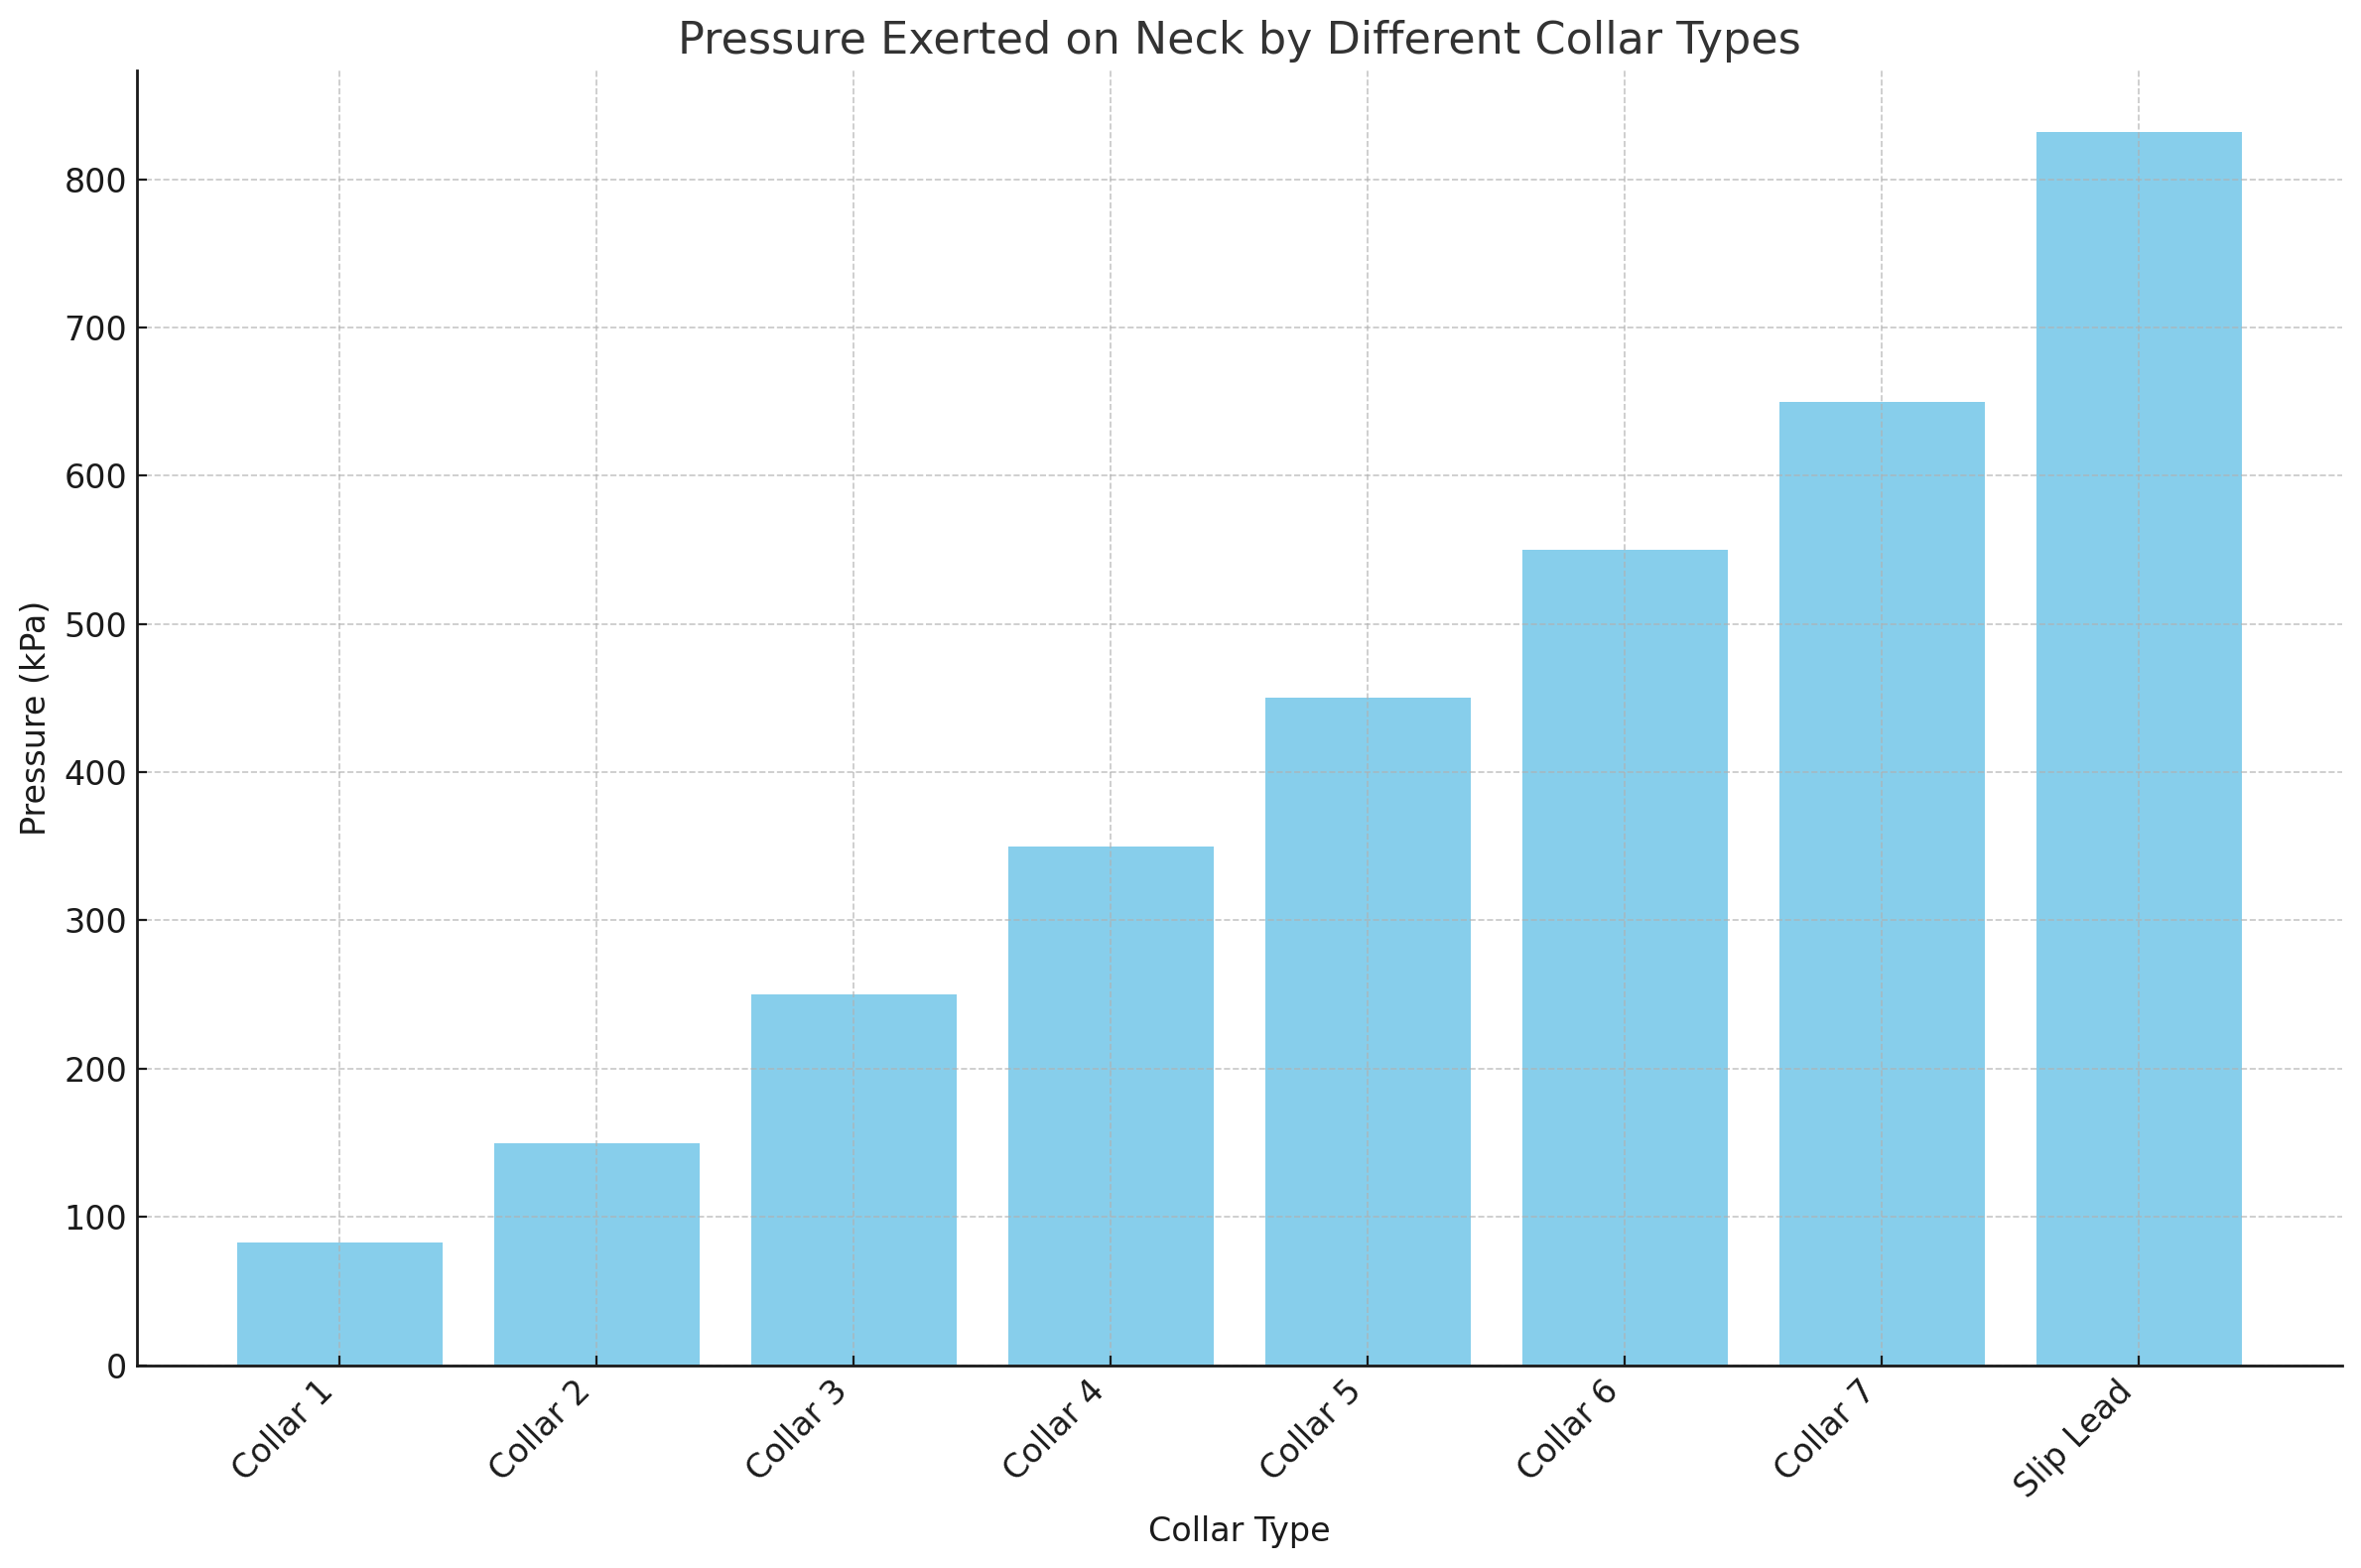 Pressure exerted on neck by different collar types